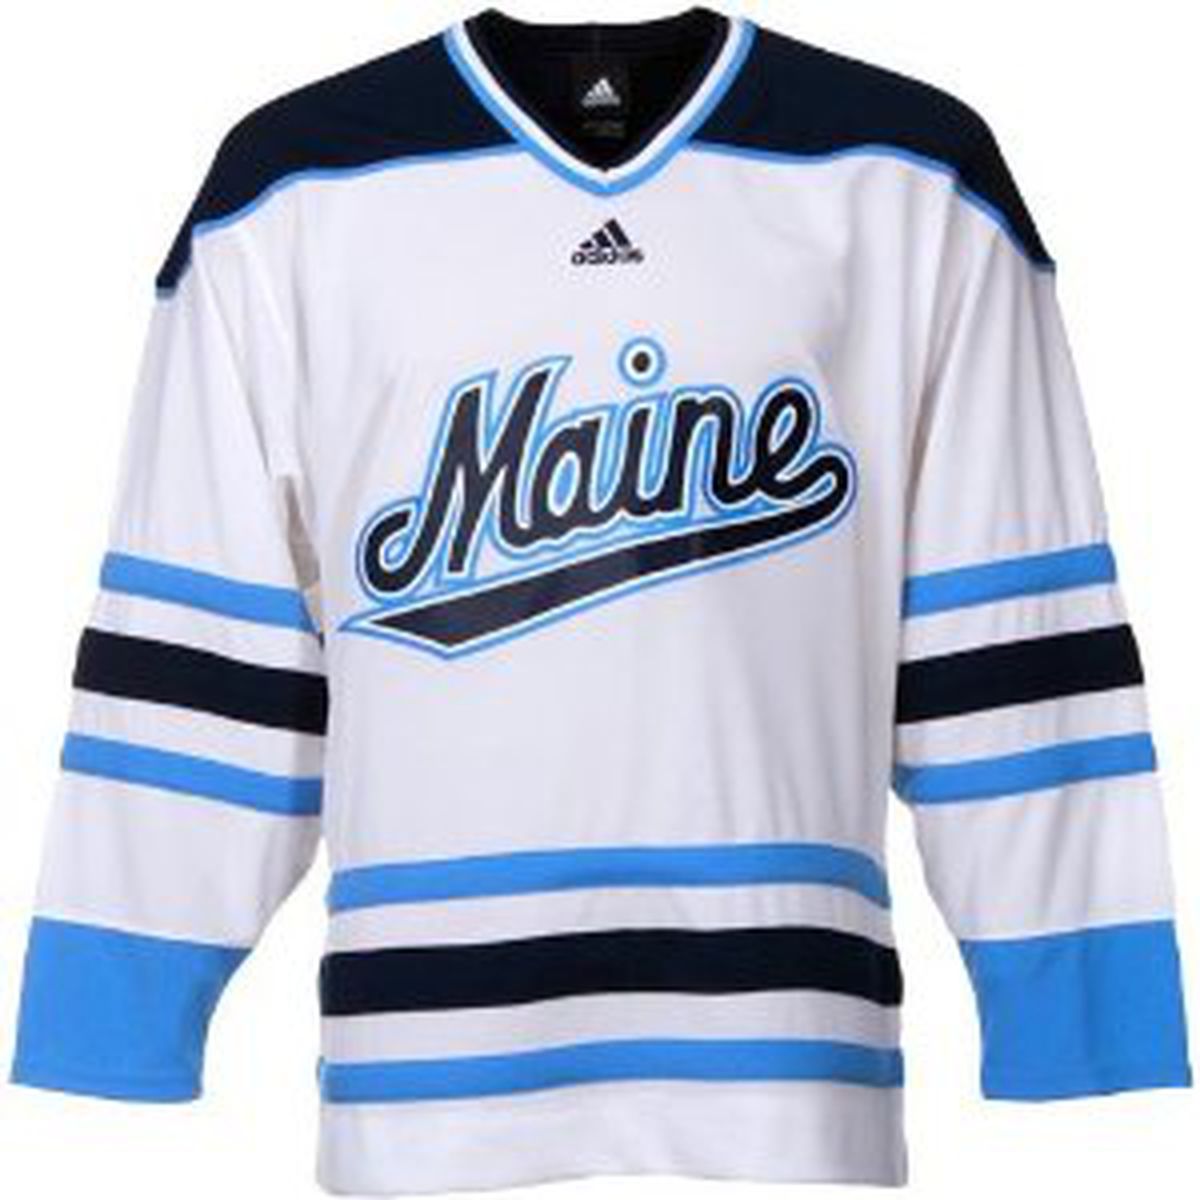 Adidas won the NHL\'s Jersey deal. Now what? - Stanley Cup of Chowder